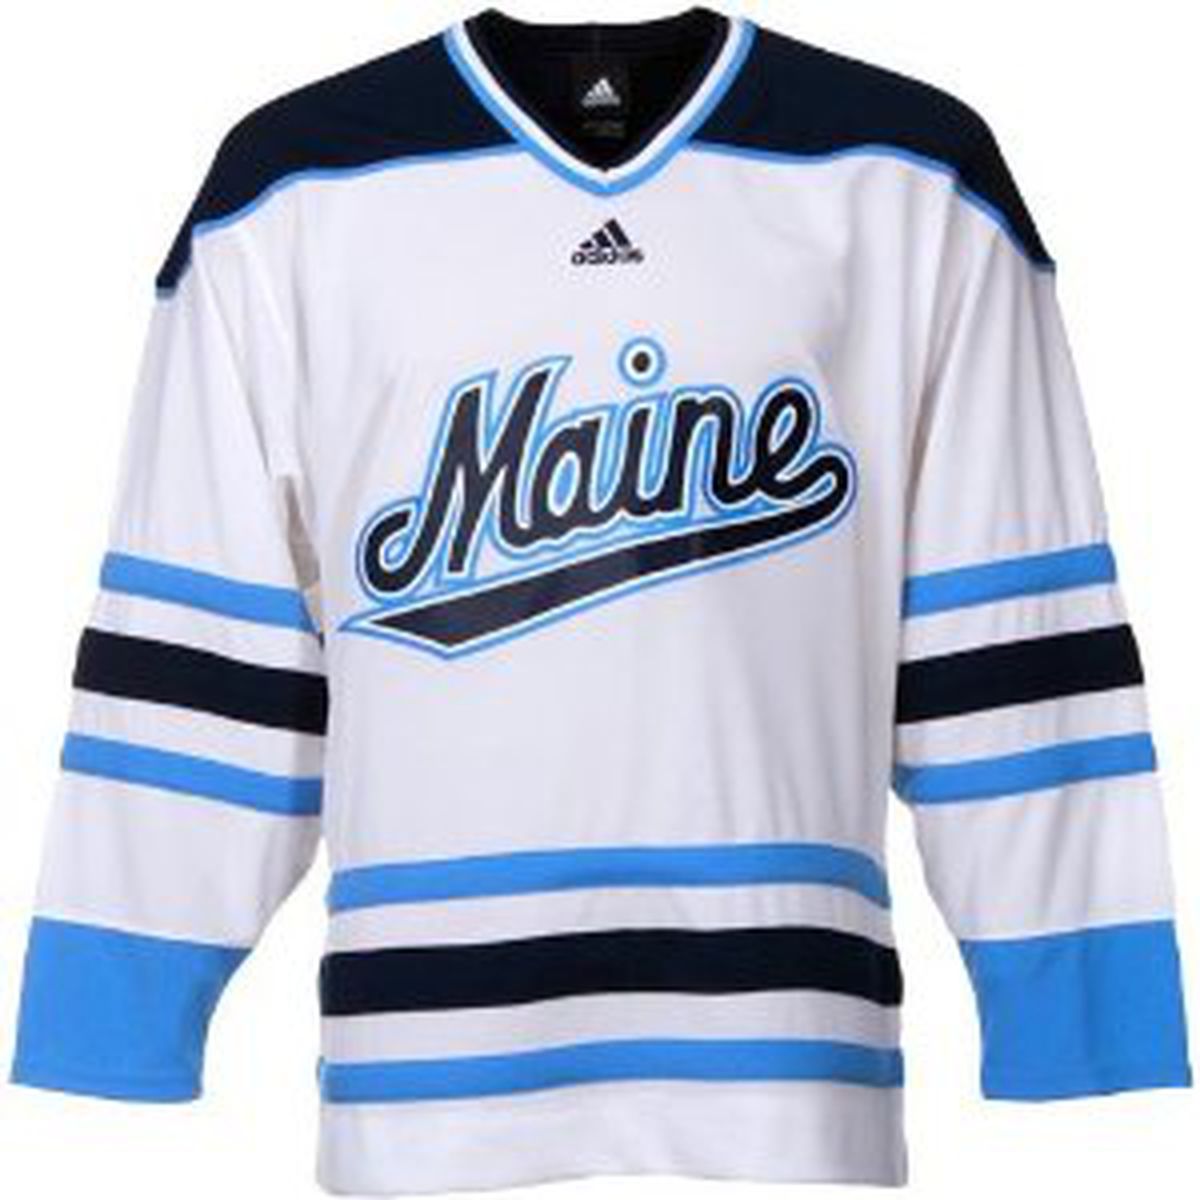 Adidas won the NHL\'s Jersey deal. Now what? - Stanley Cup of Chowder